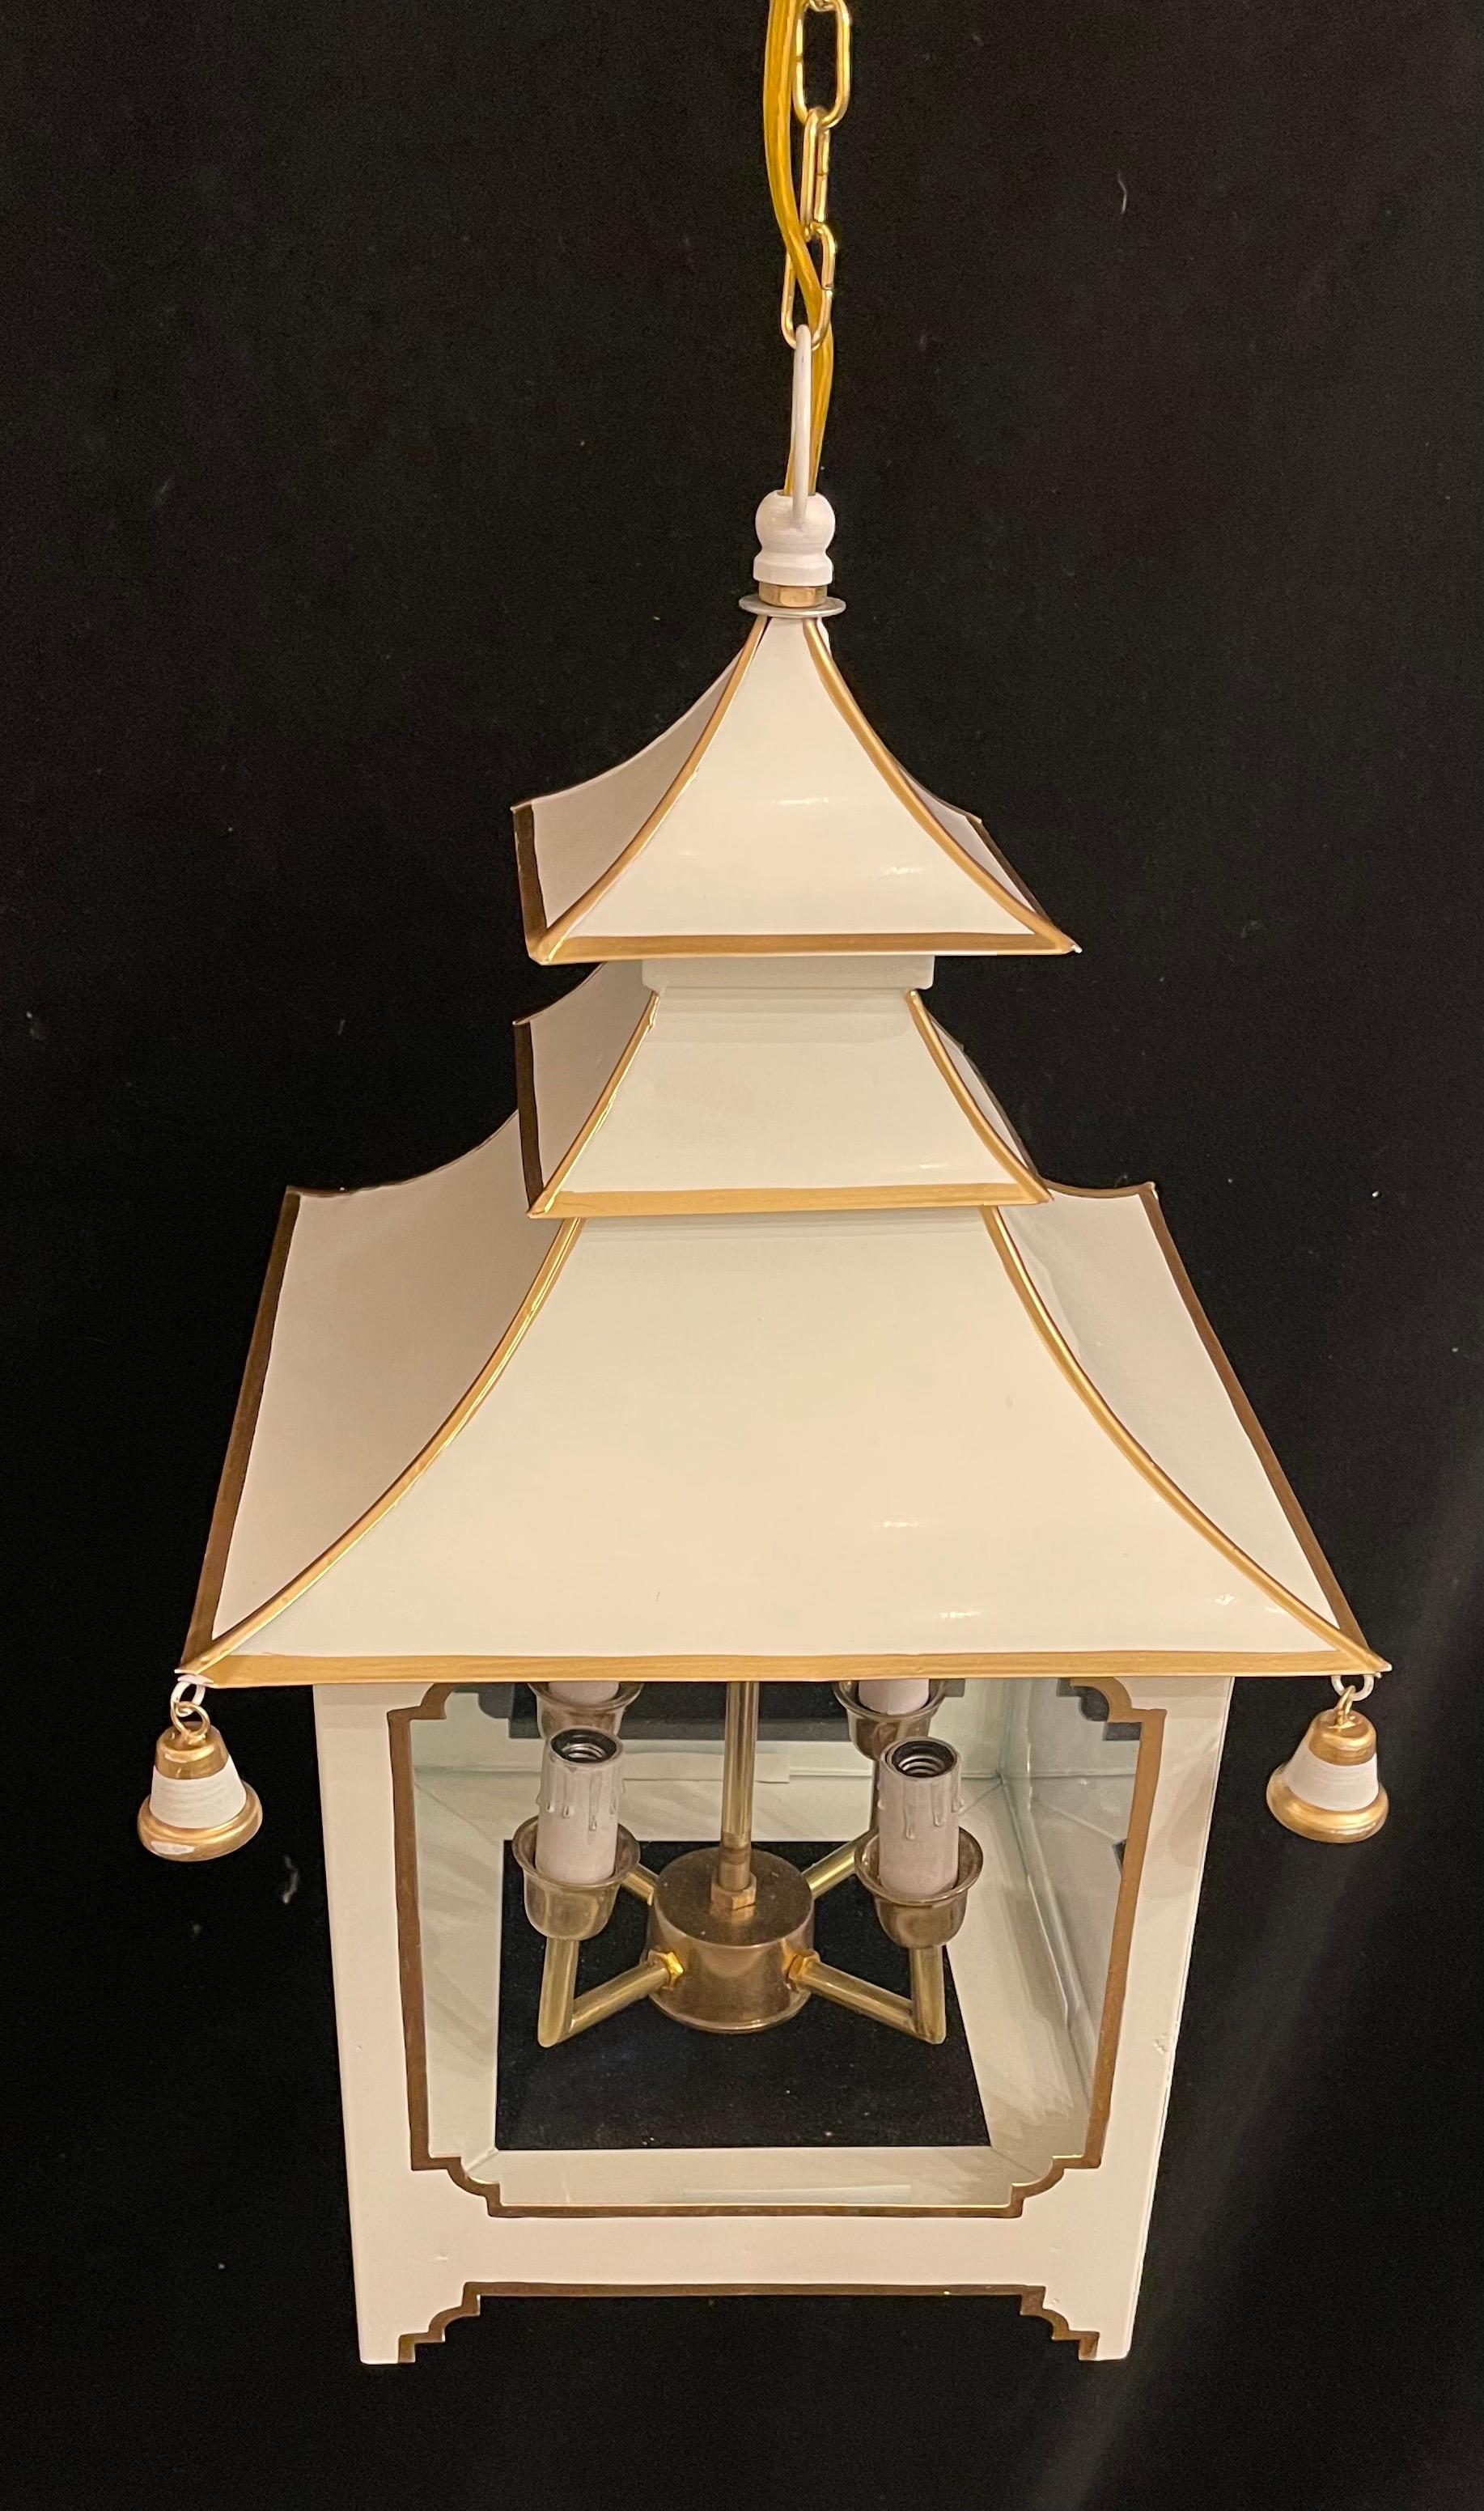 A wonderful chinoiserie pagoda form white enameled with gold trim and glass panel lantern fixture fitted with four candelabra sockets.
Accompanied by chain and canopy as well as mounting hardware for installation.
